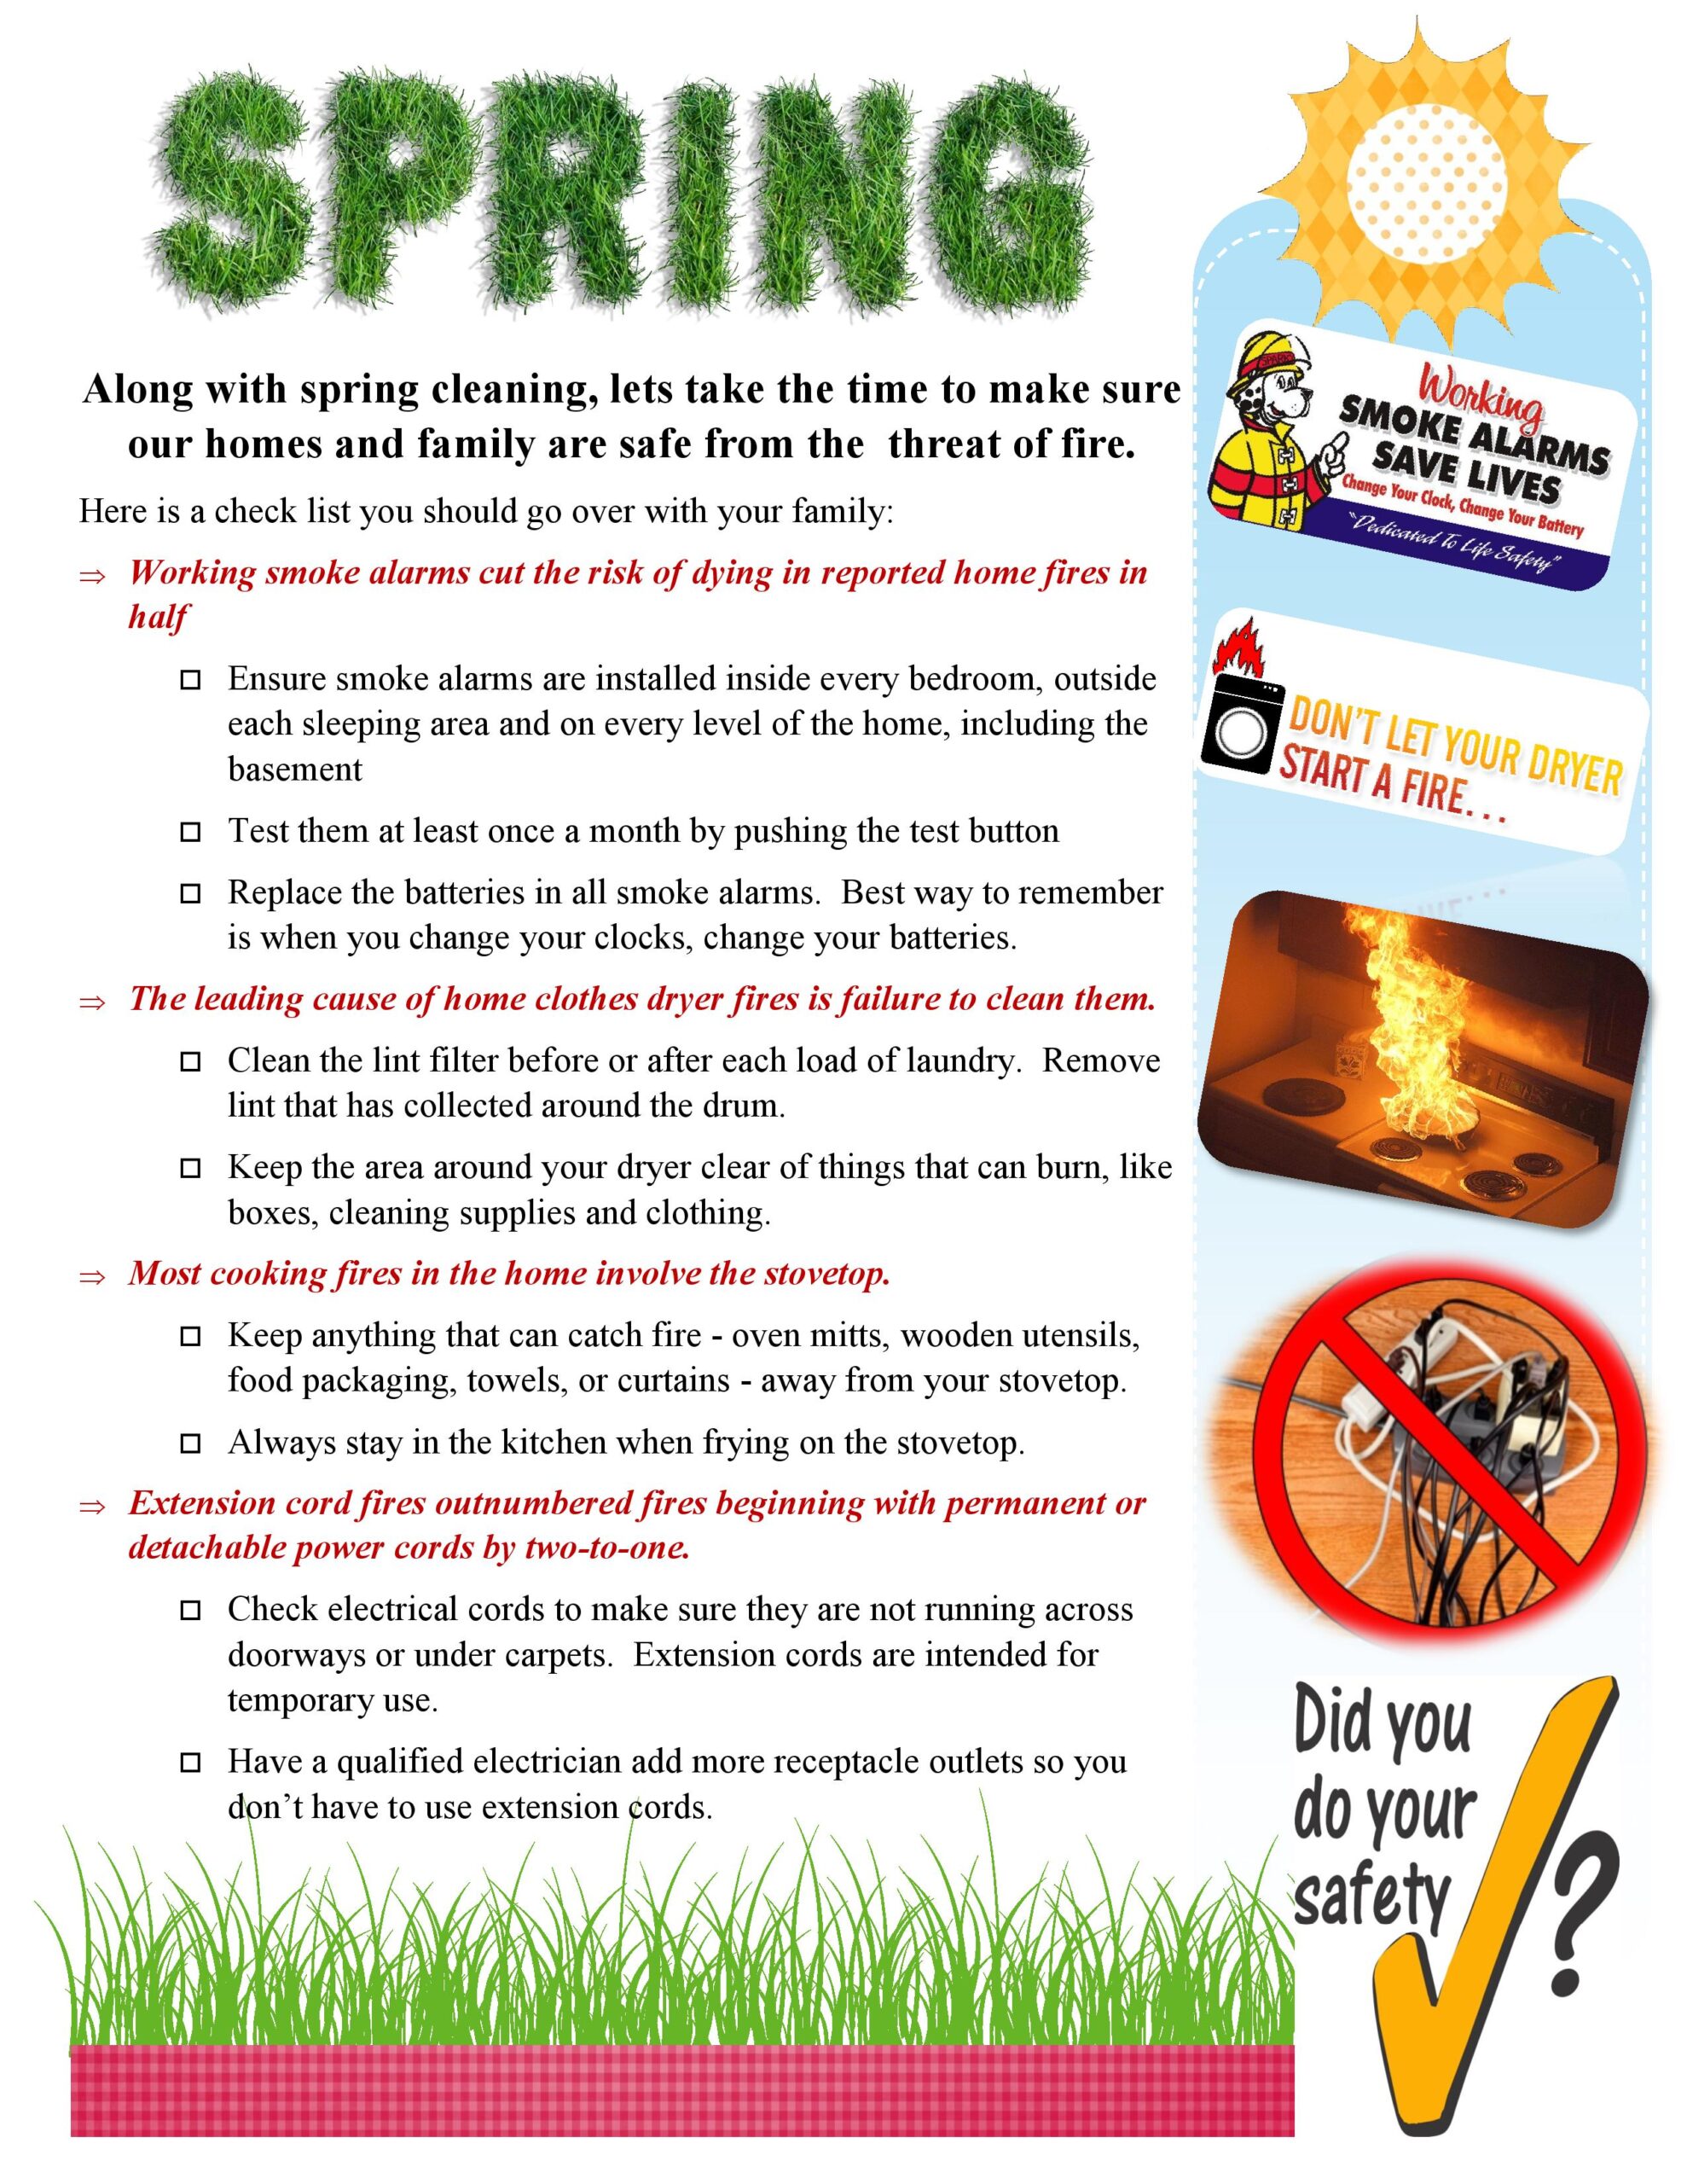 spring outdoor safety tips